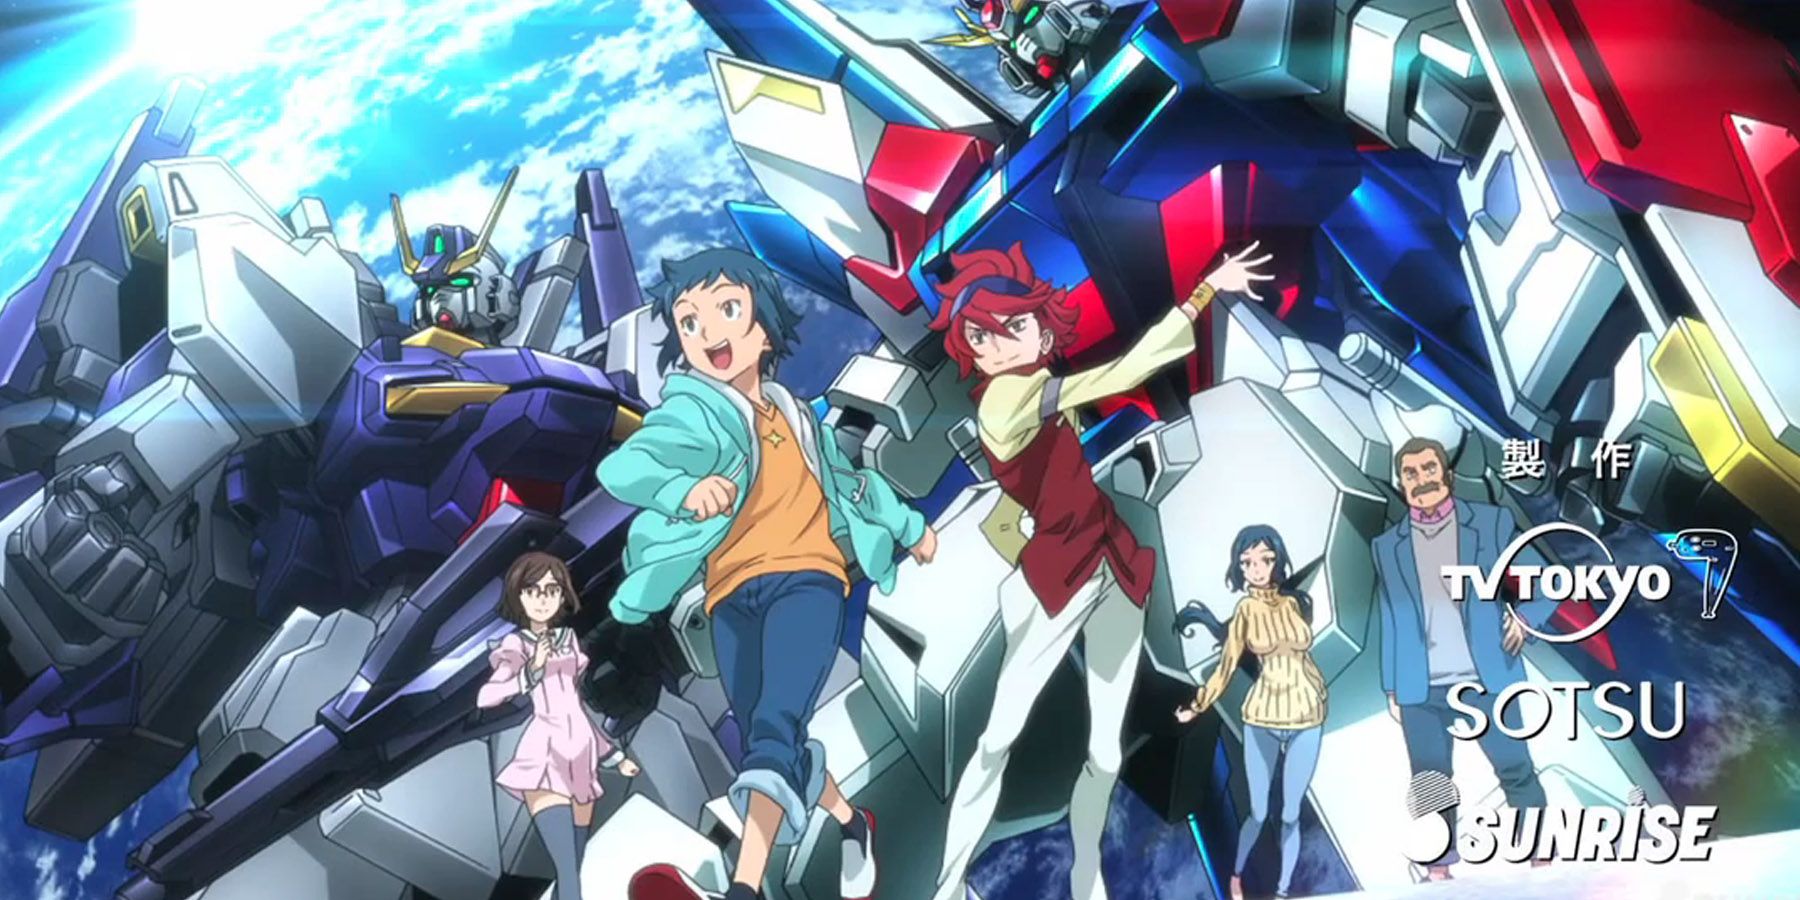 The creator of 'Gundam' says that the anime industry is in “a period of  prosperity”, but he fears for its future - Meristation